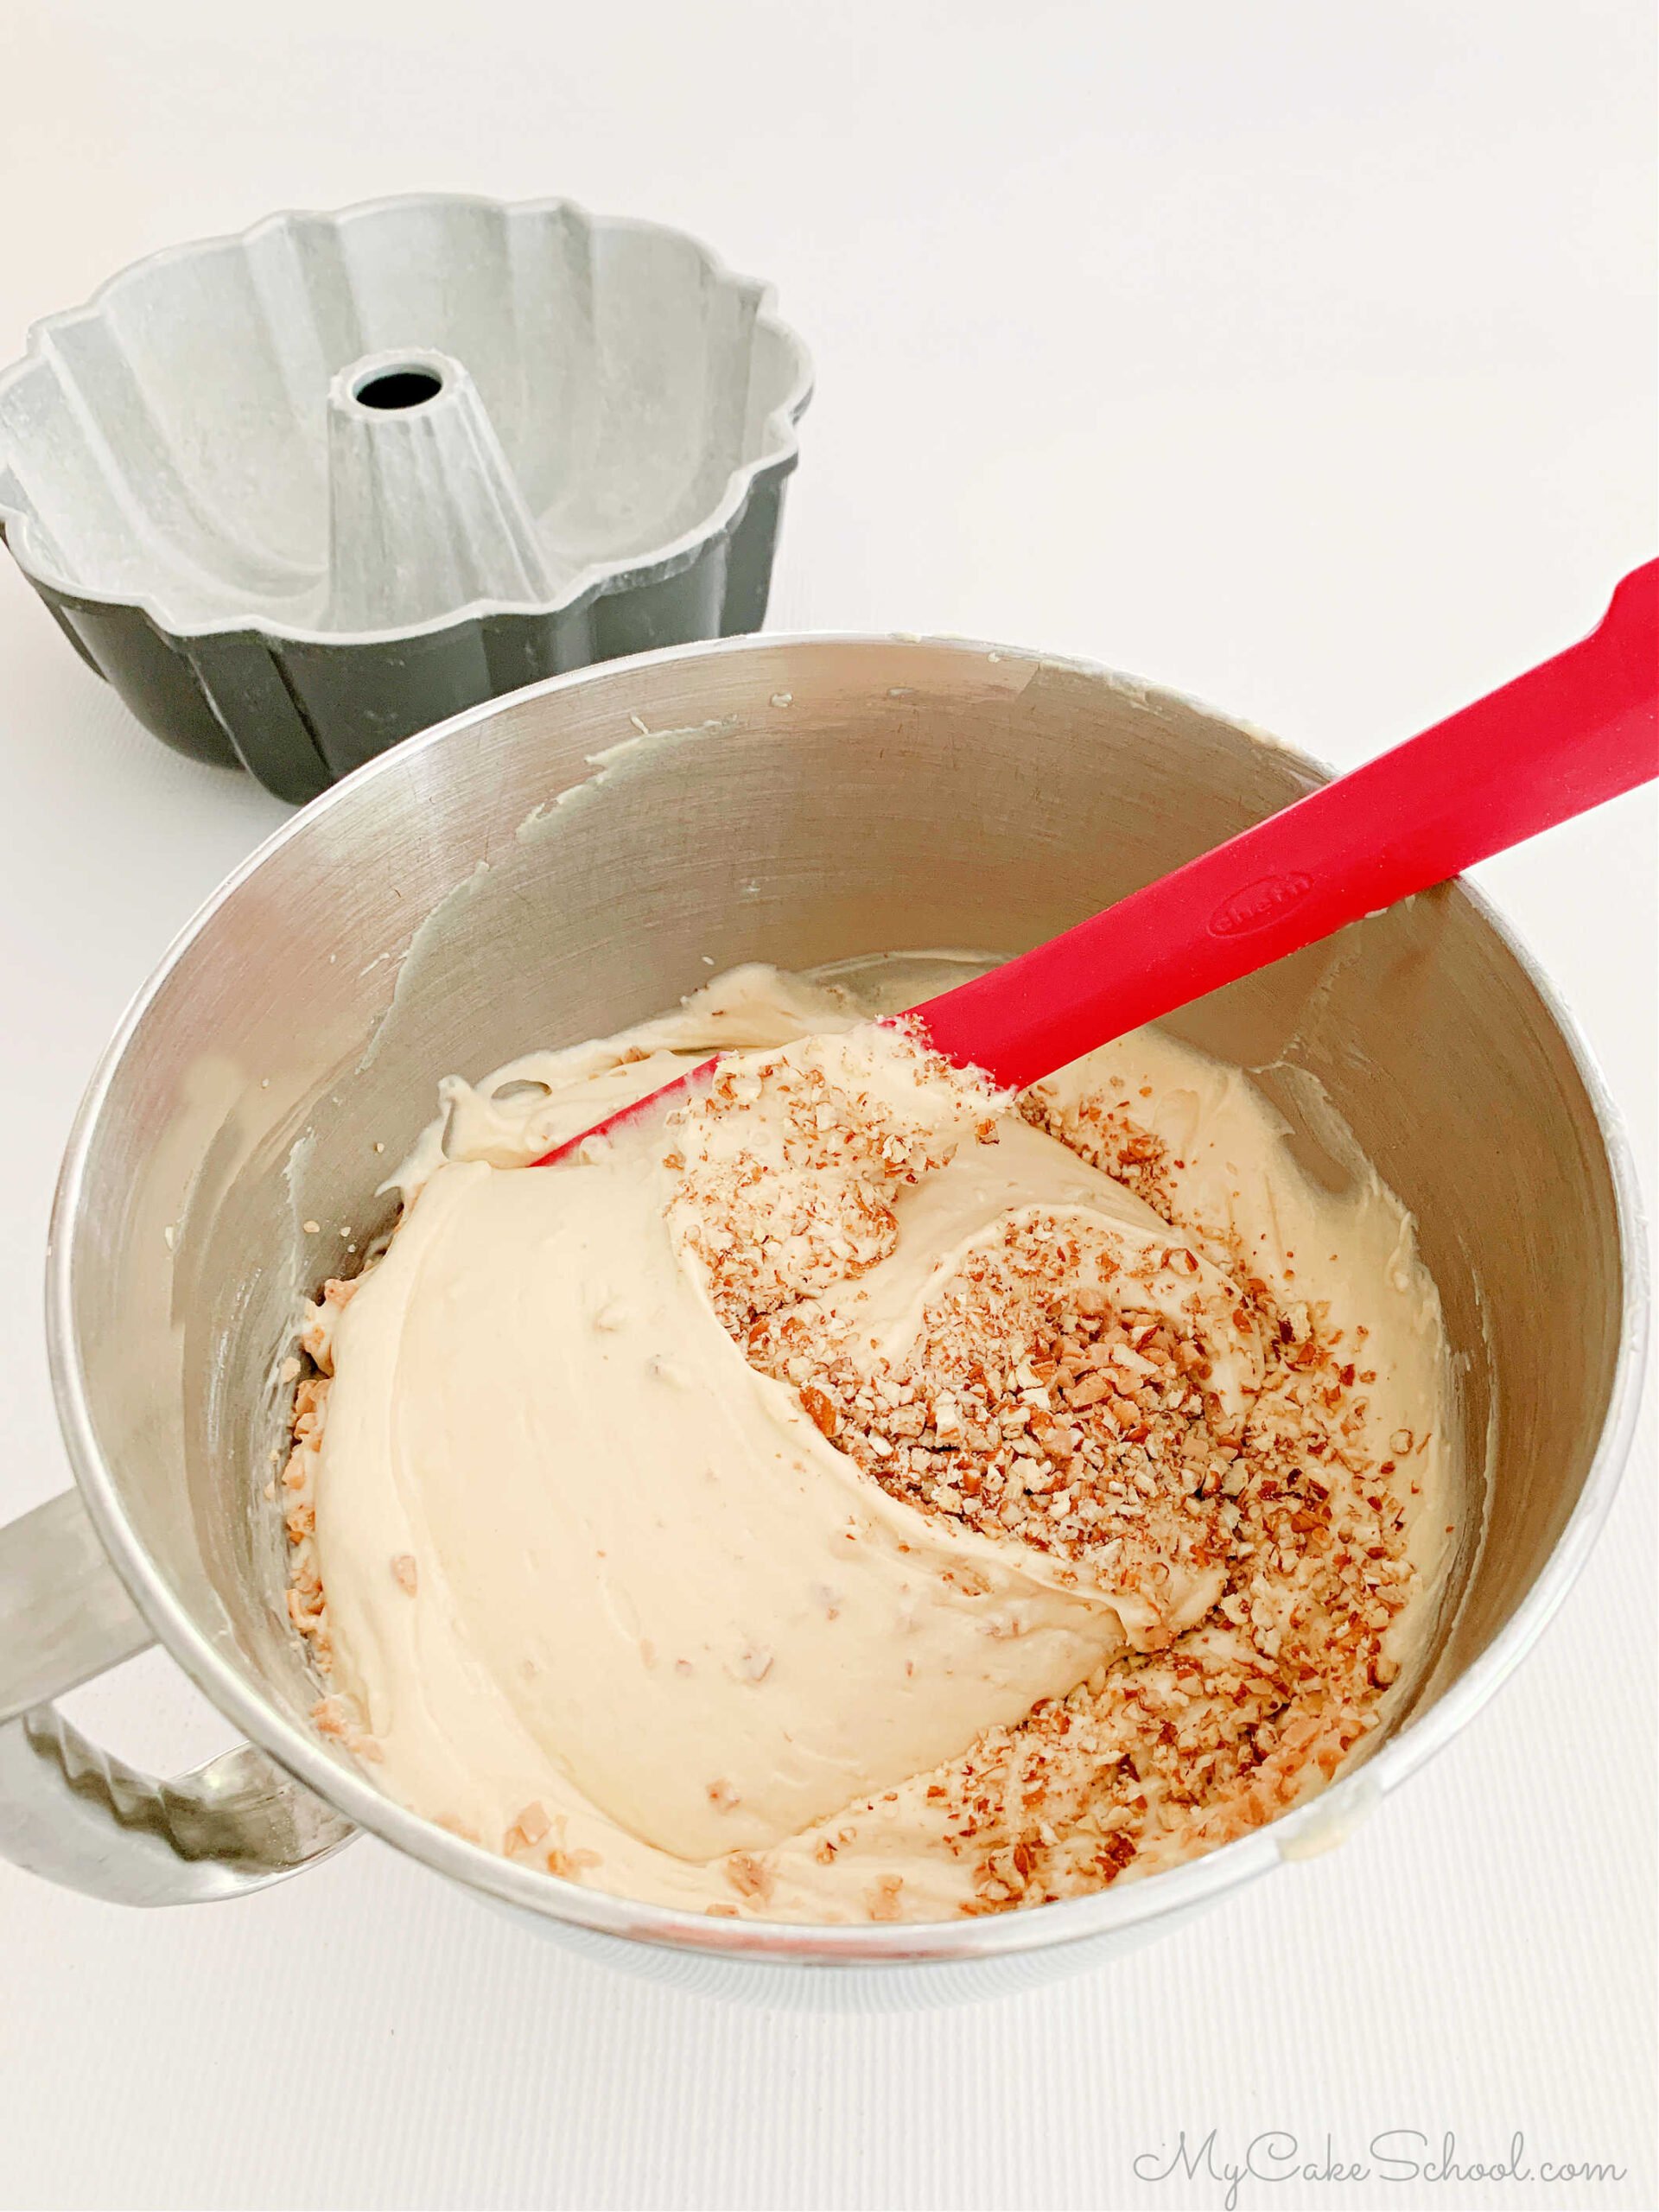 Folding toffee bits and pecans into bowl of cake batter with a rubber spatula